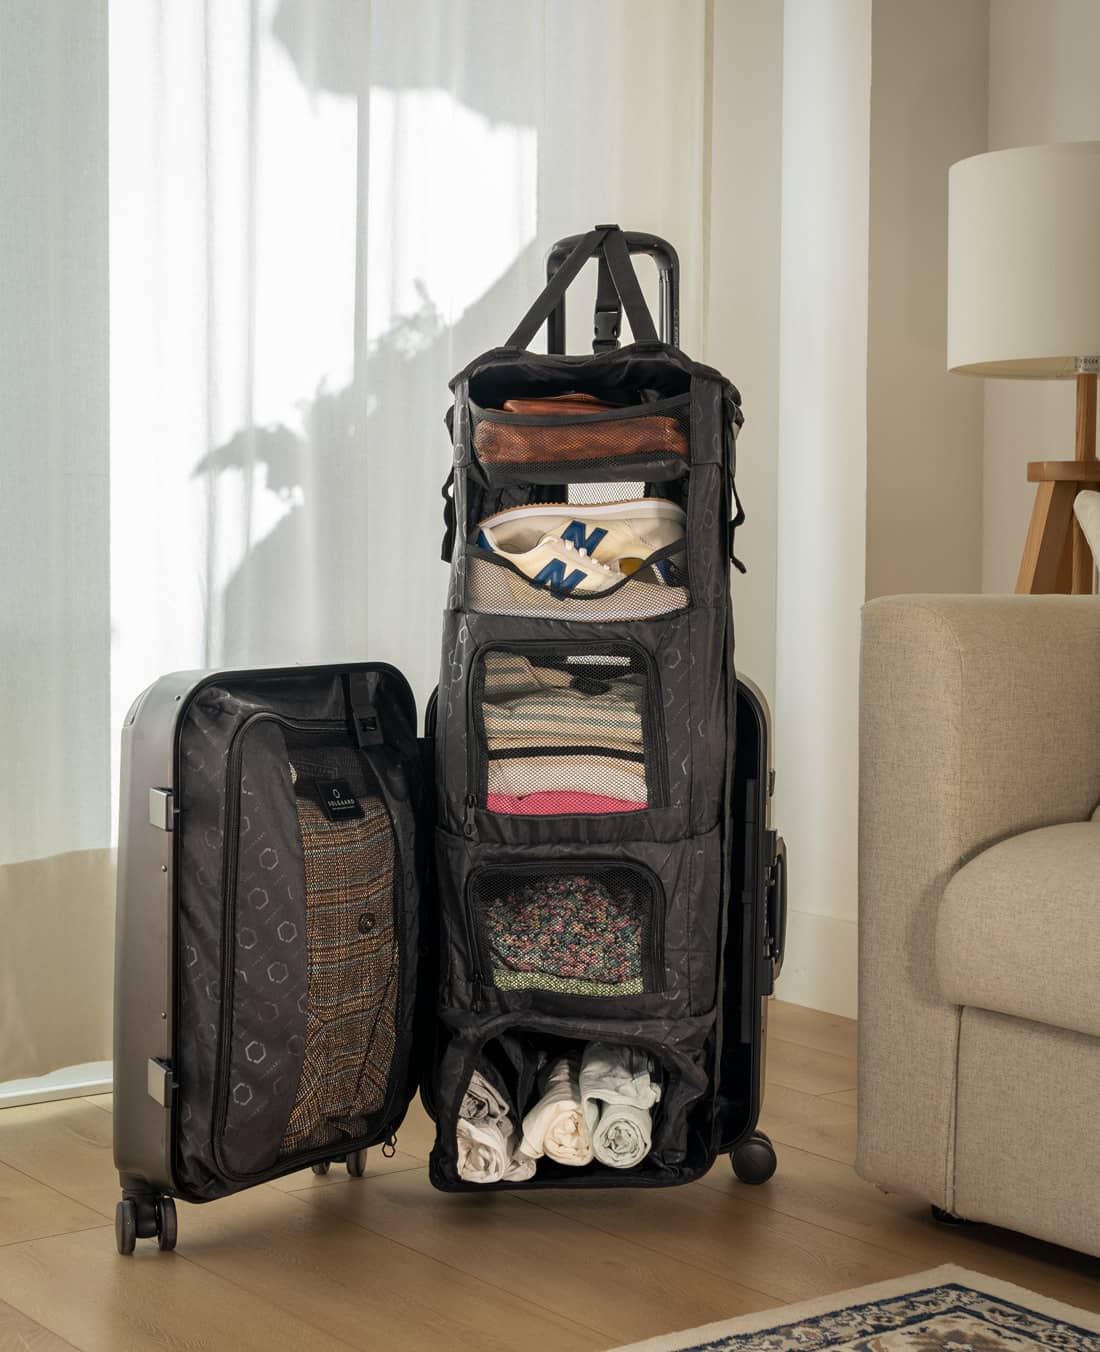 Solgaard Carry-On Hands-On